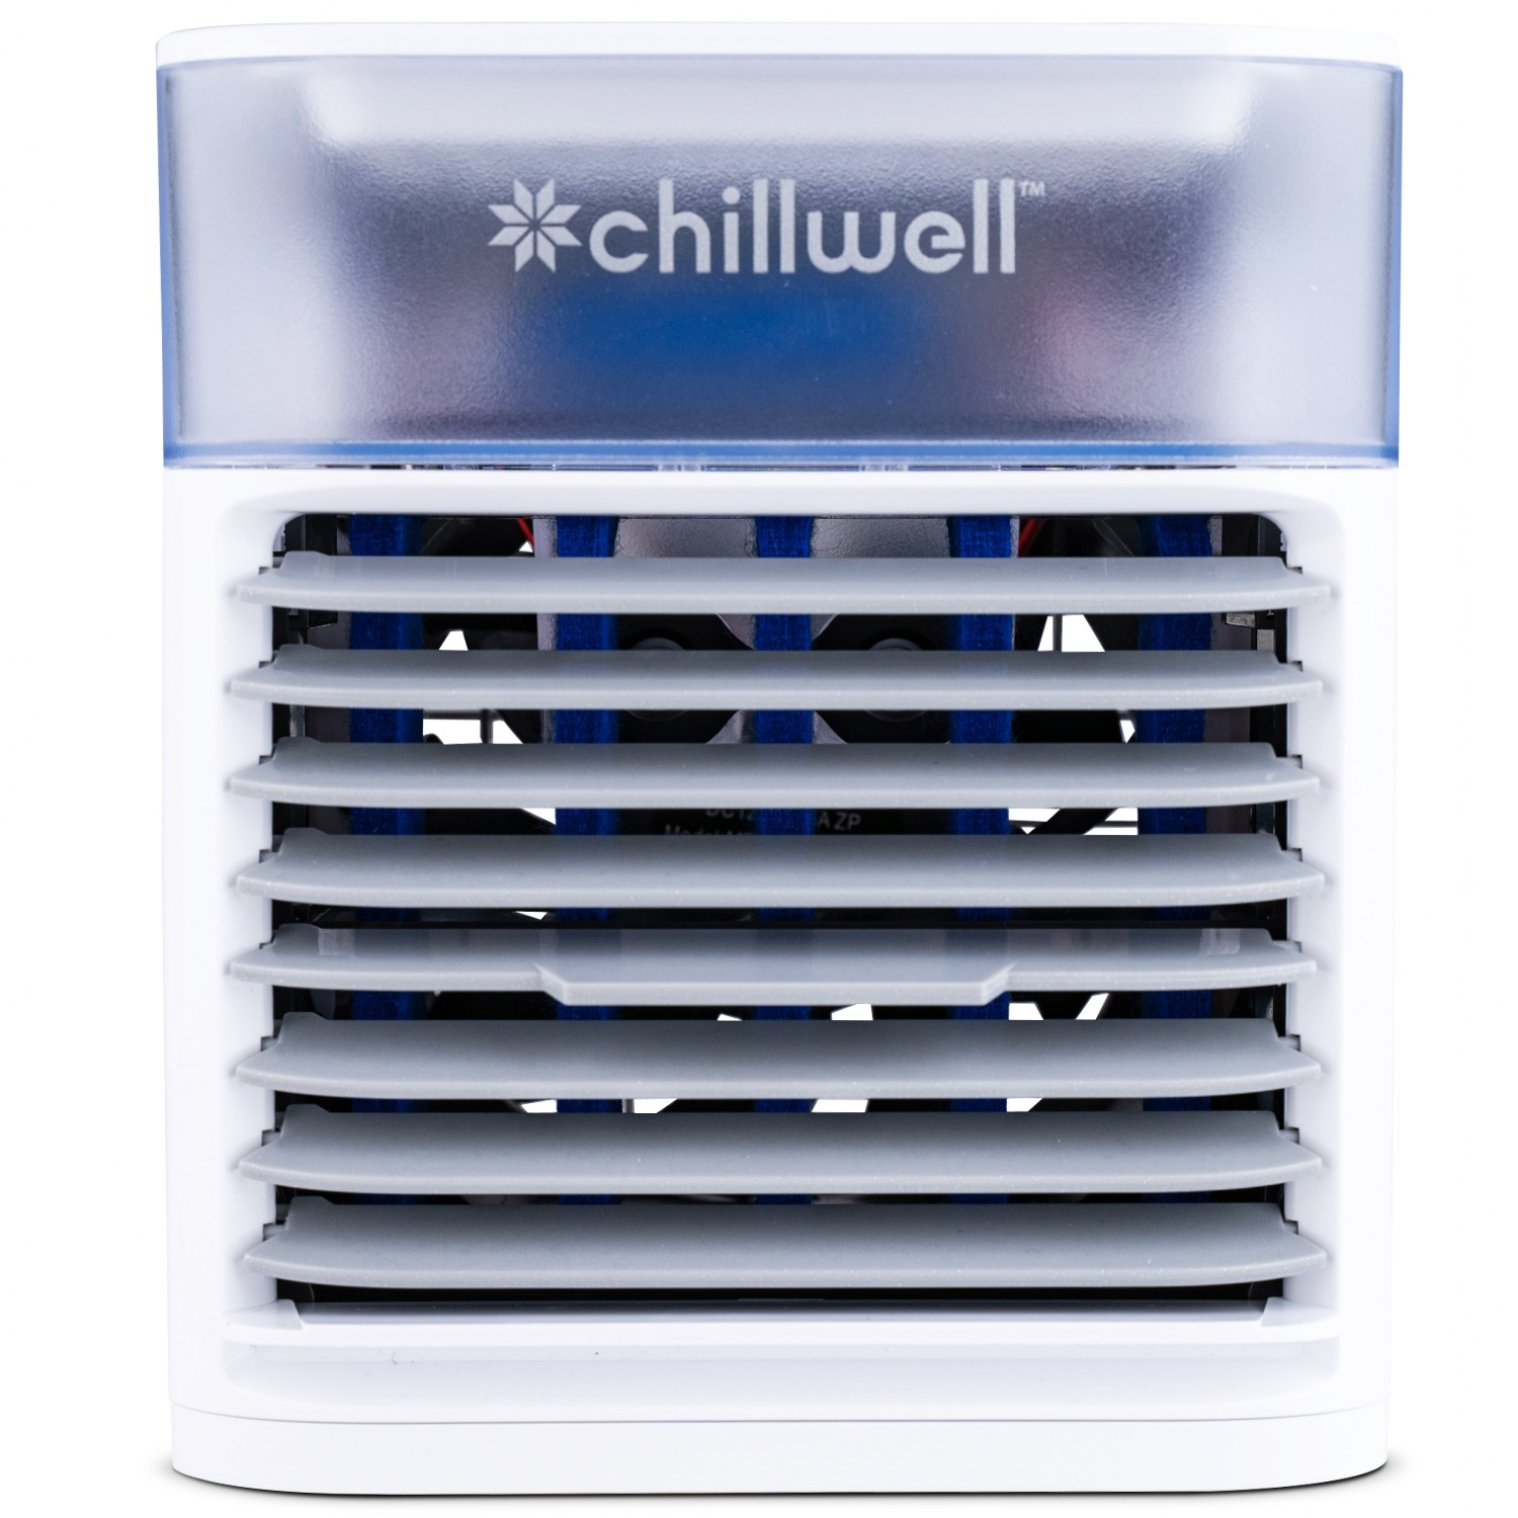 Chillwell AC Cooler As Seen On Tv